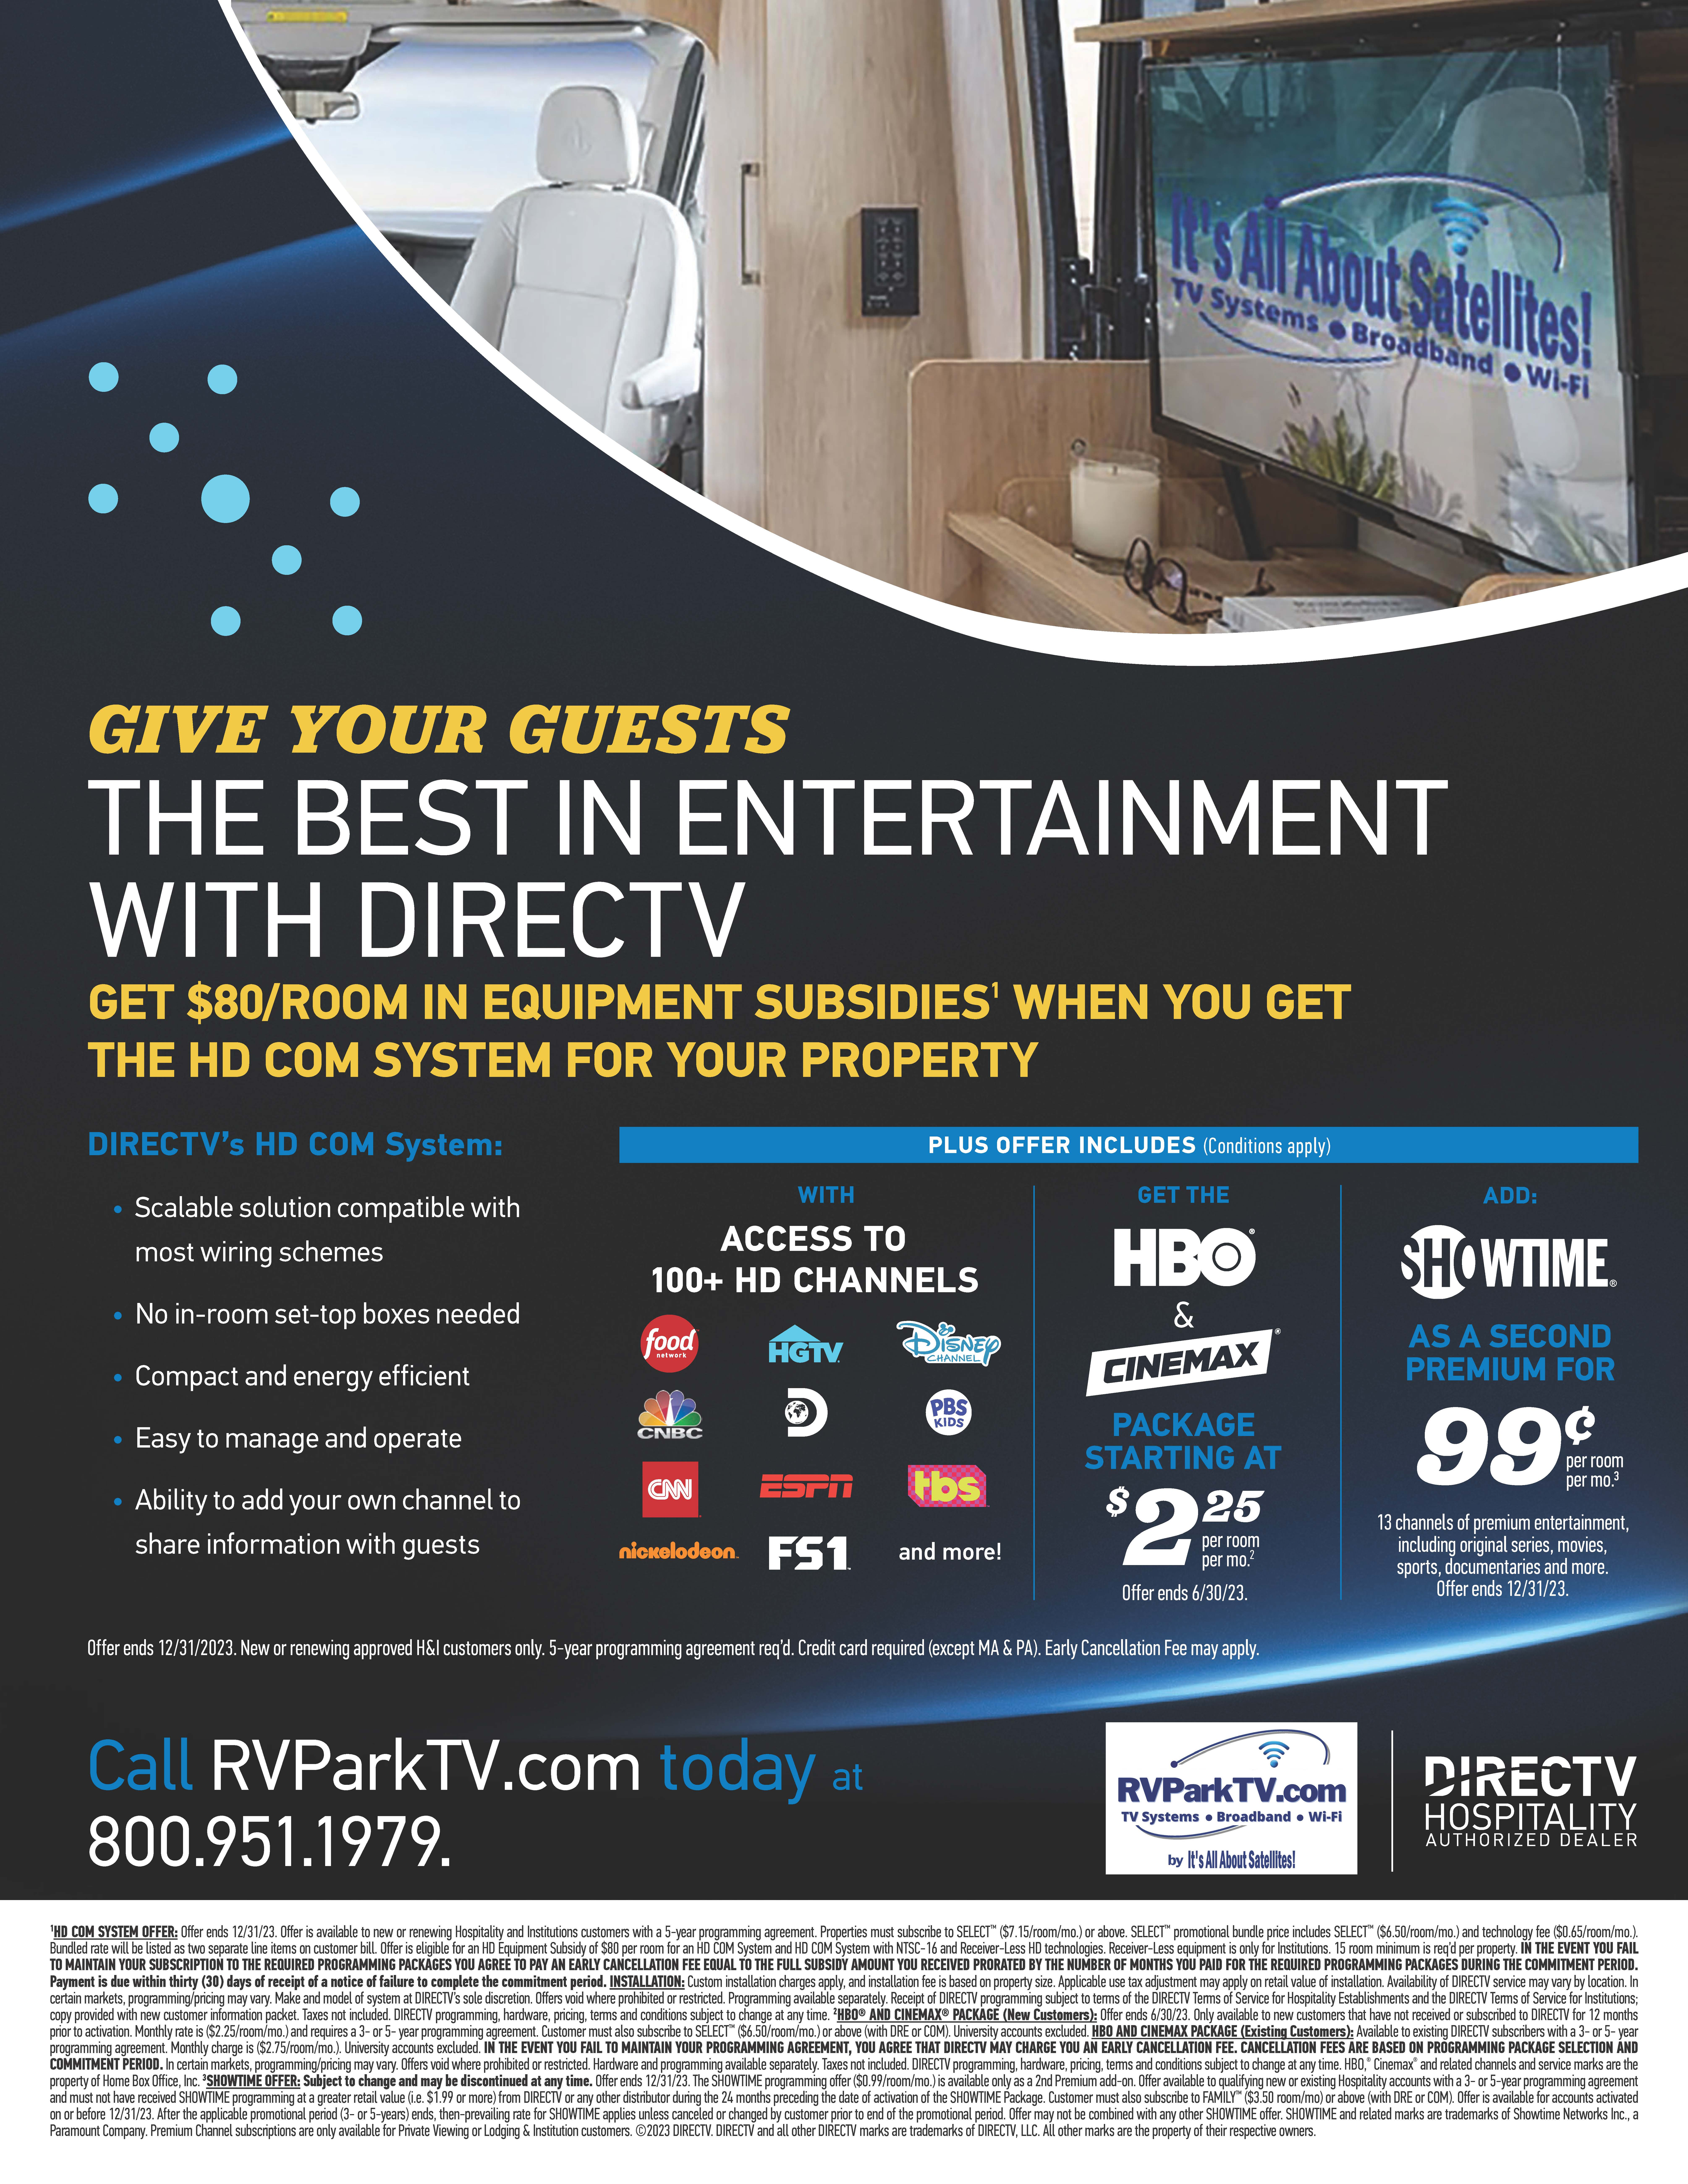 DIRECTV for RV Parks and Campgrounds from RVPARKTV.com by Its All About Satellites TV Systems WiFi Networks and Broadband Internet